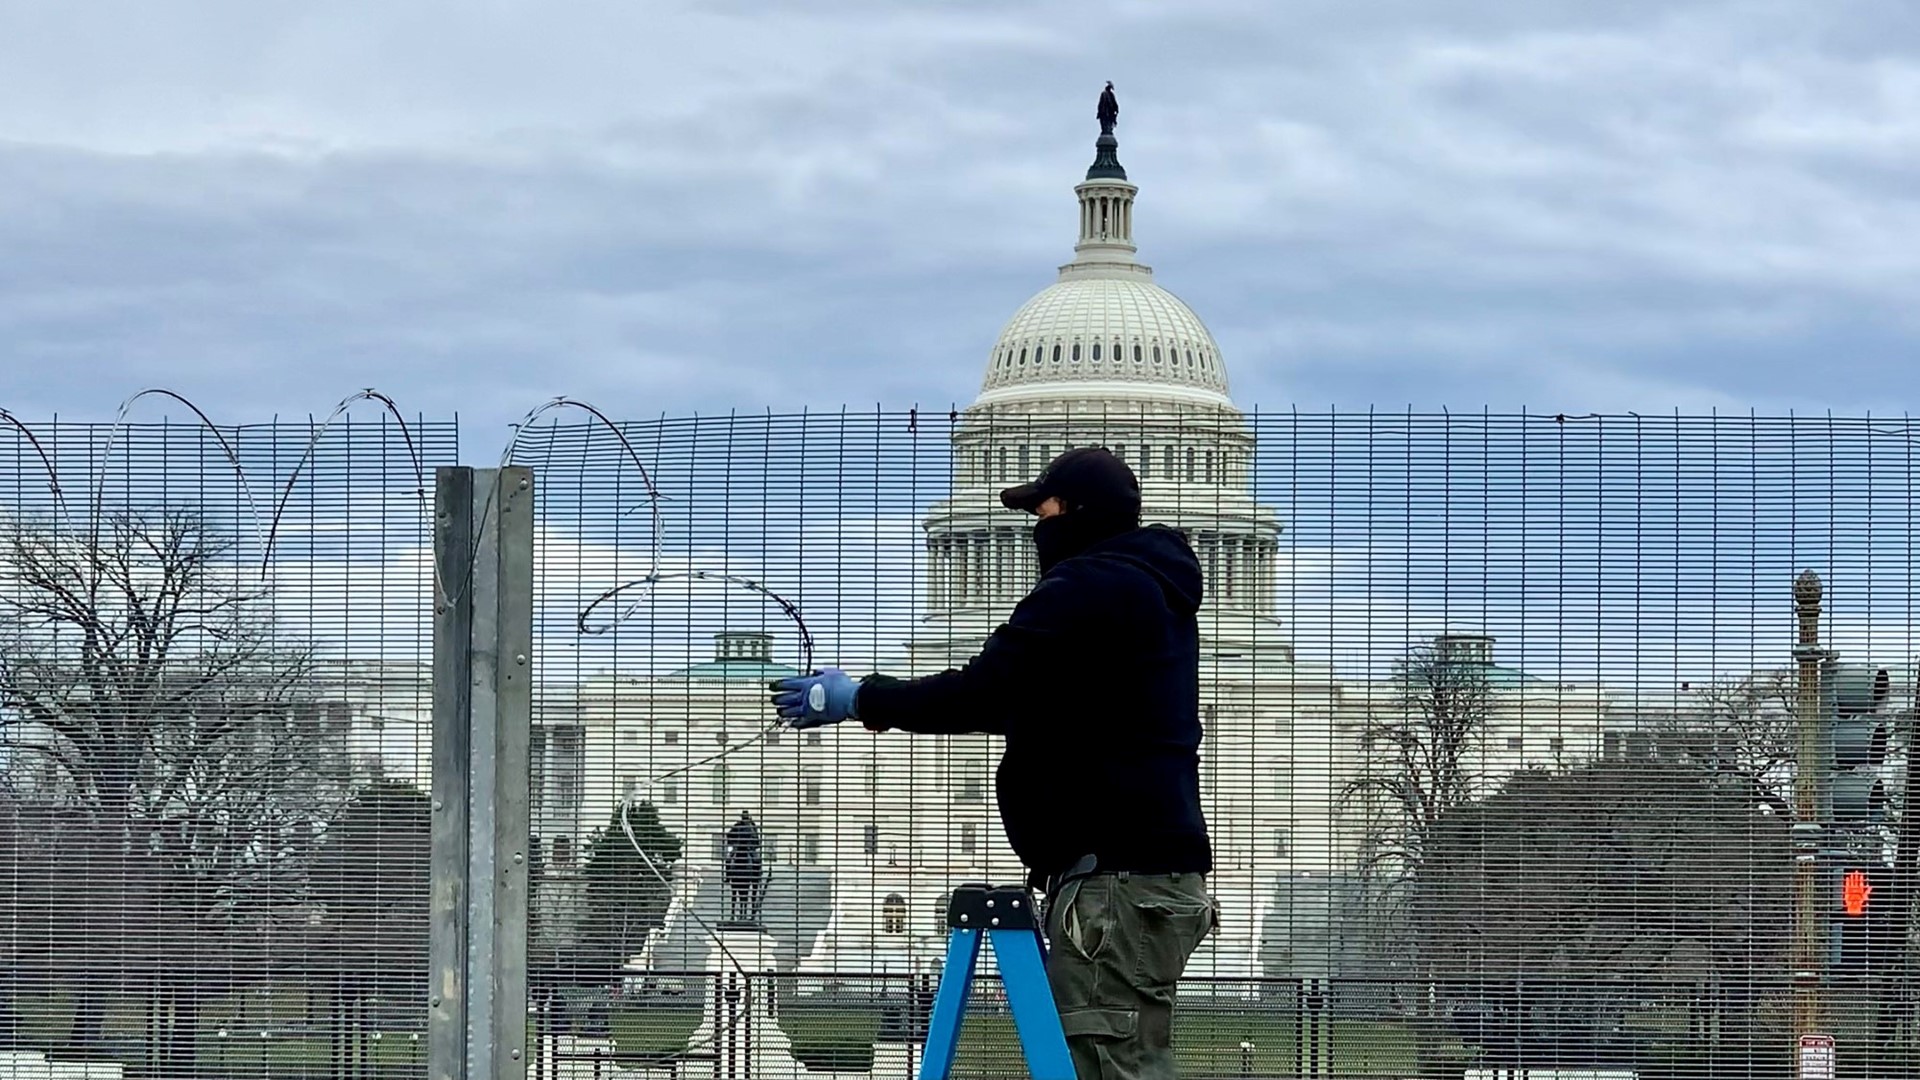 Crews removed barbed wire from some of the tallest fencing around the Capitol Monday. A fence will come down, but its razor wire will move to another barrier.